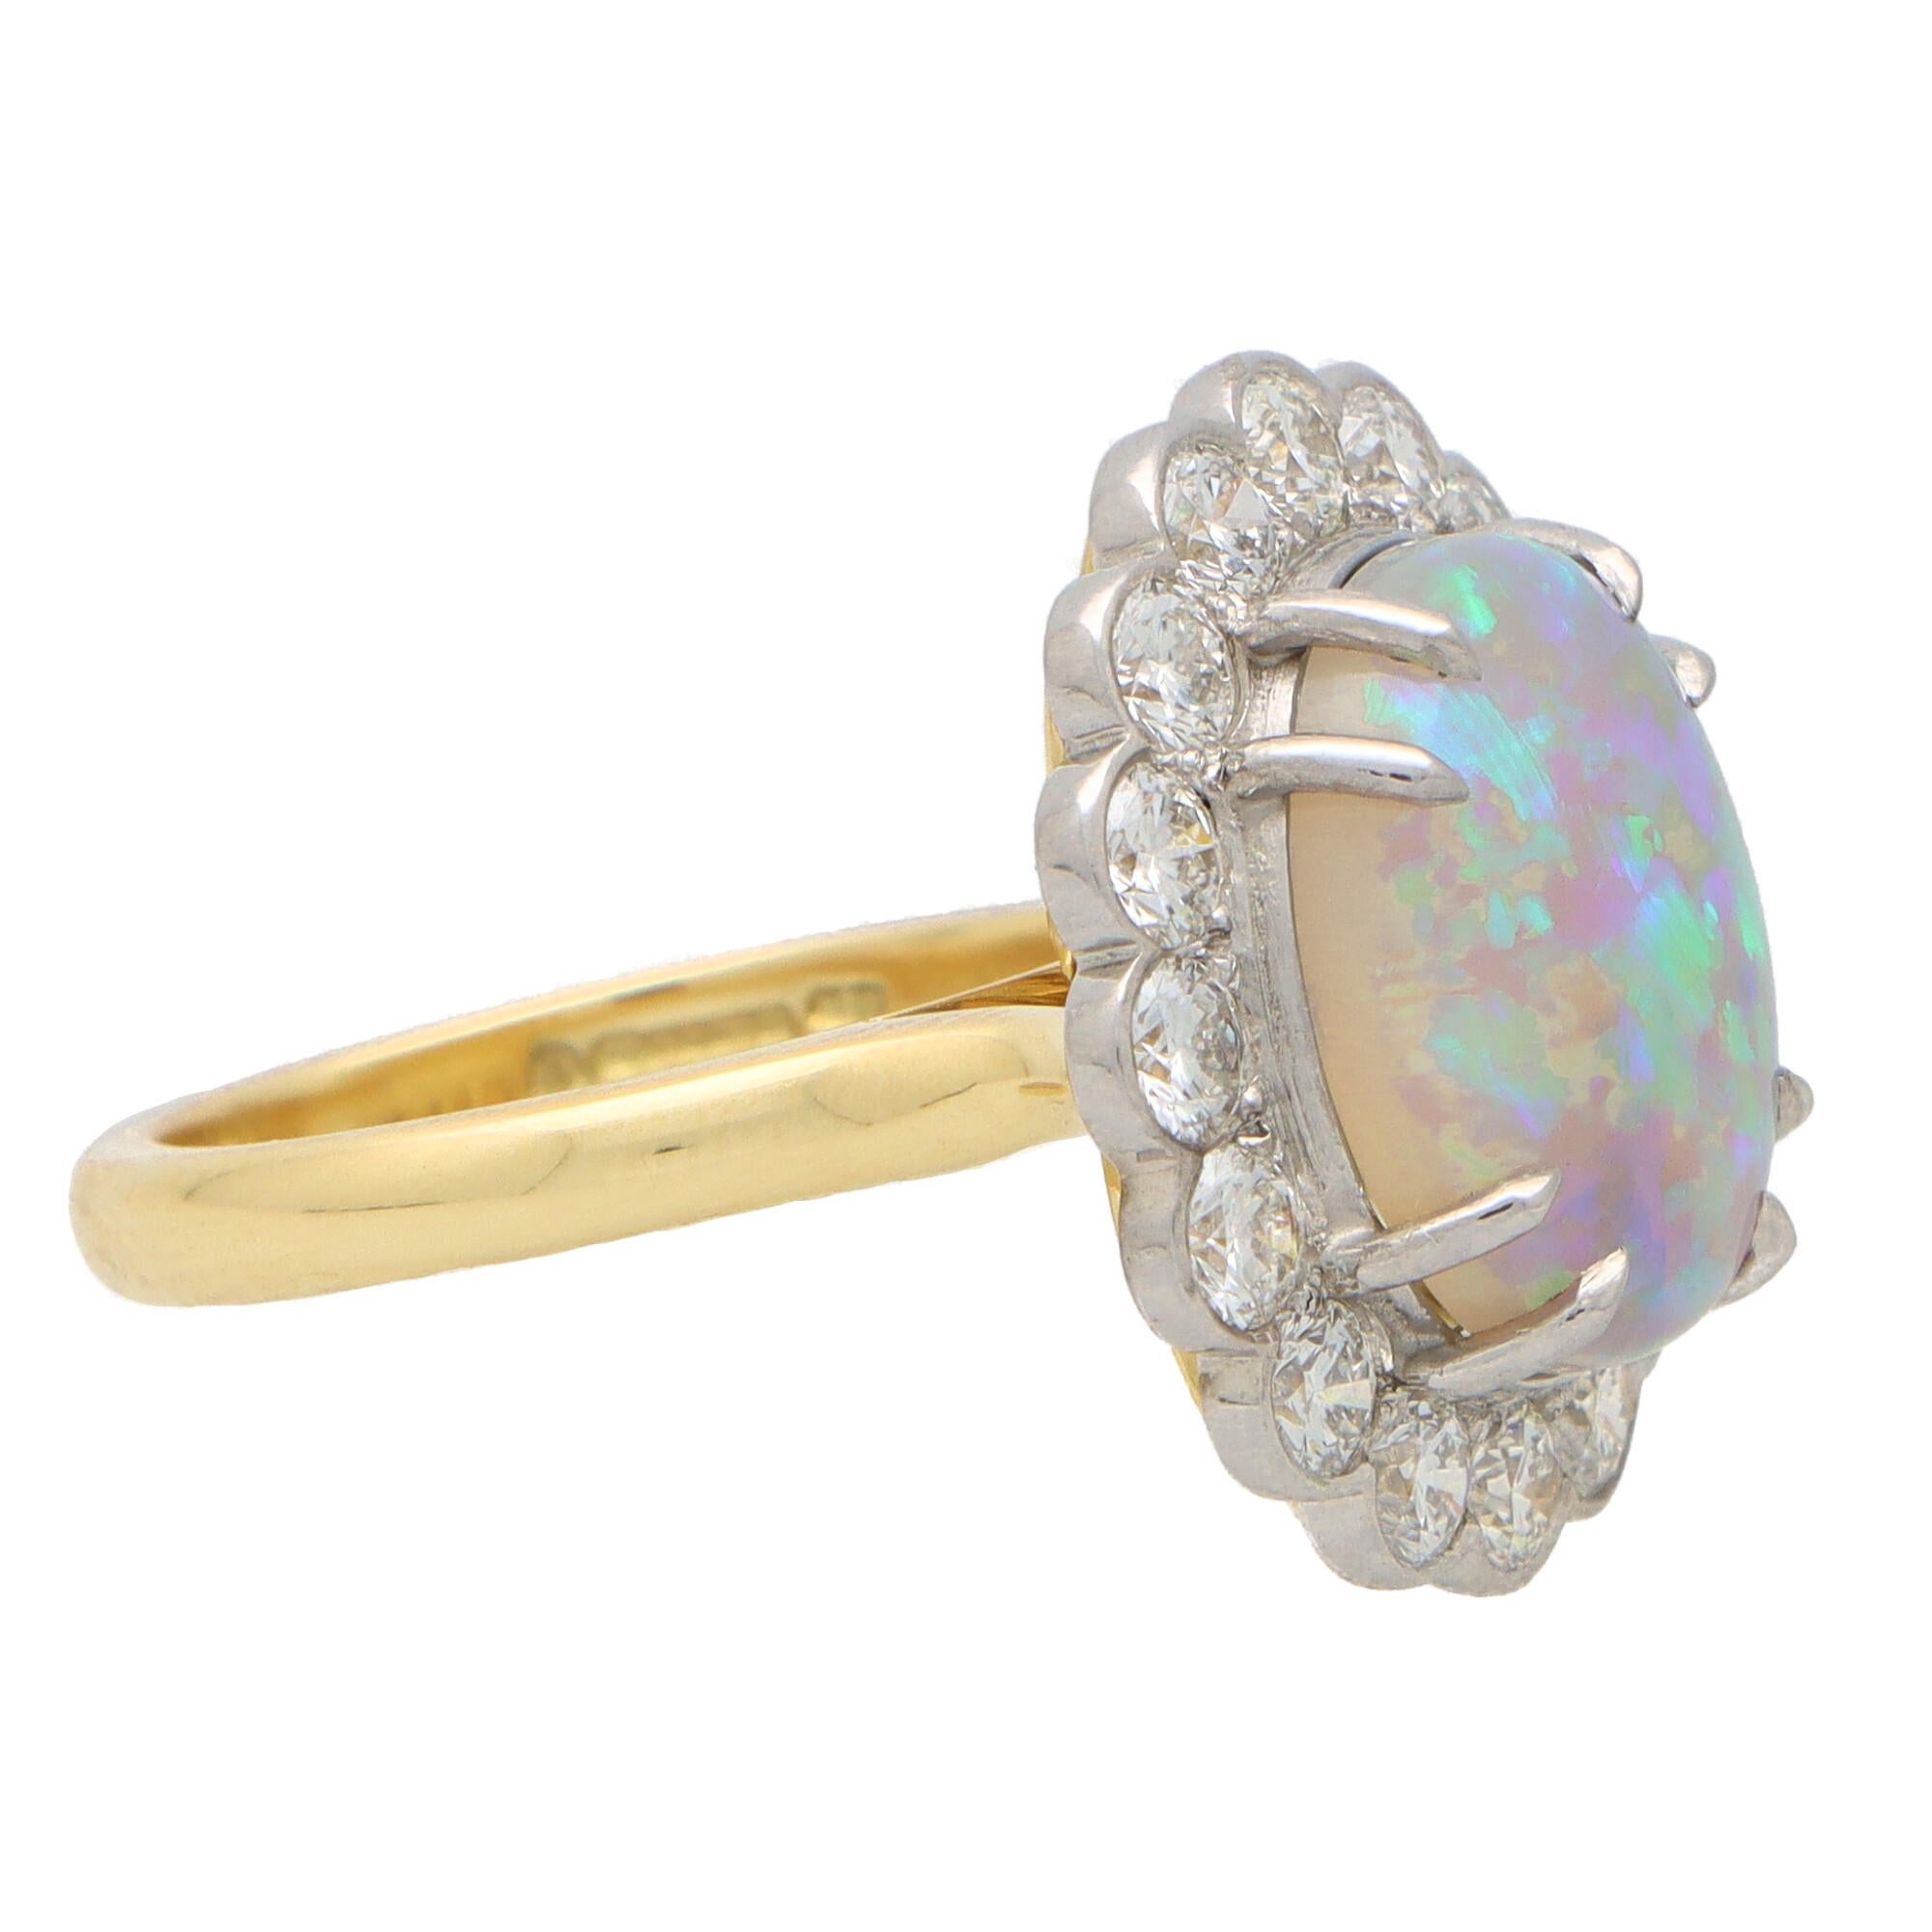 Round Cut Black Opal and Diamond Floral Cluster Ring Set in 18k Gold and Platinum